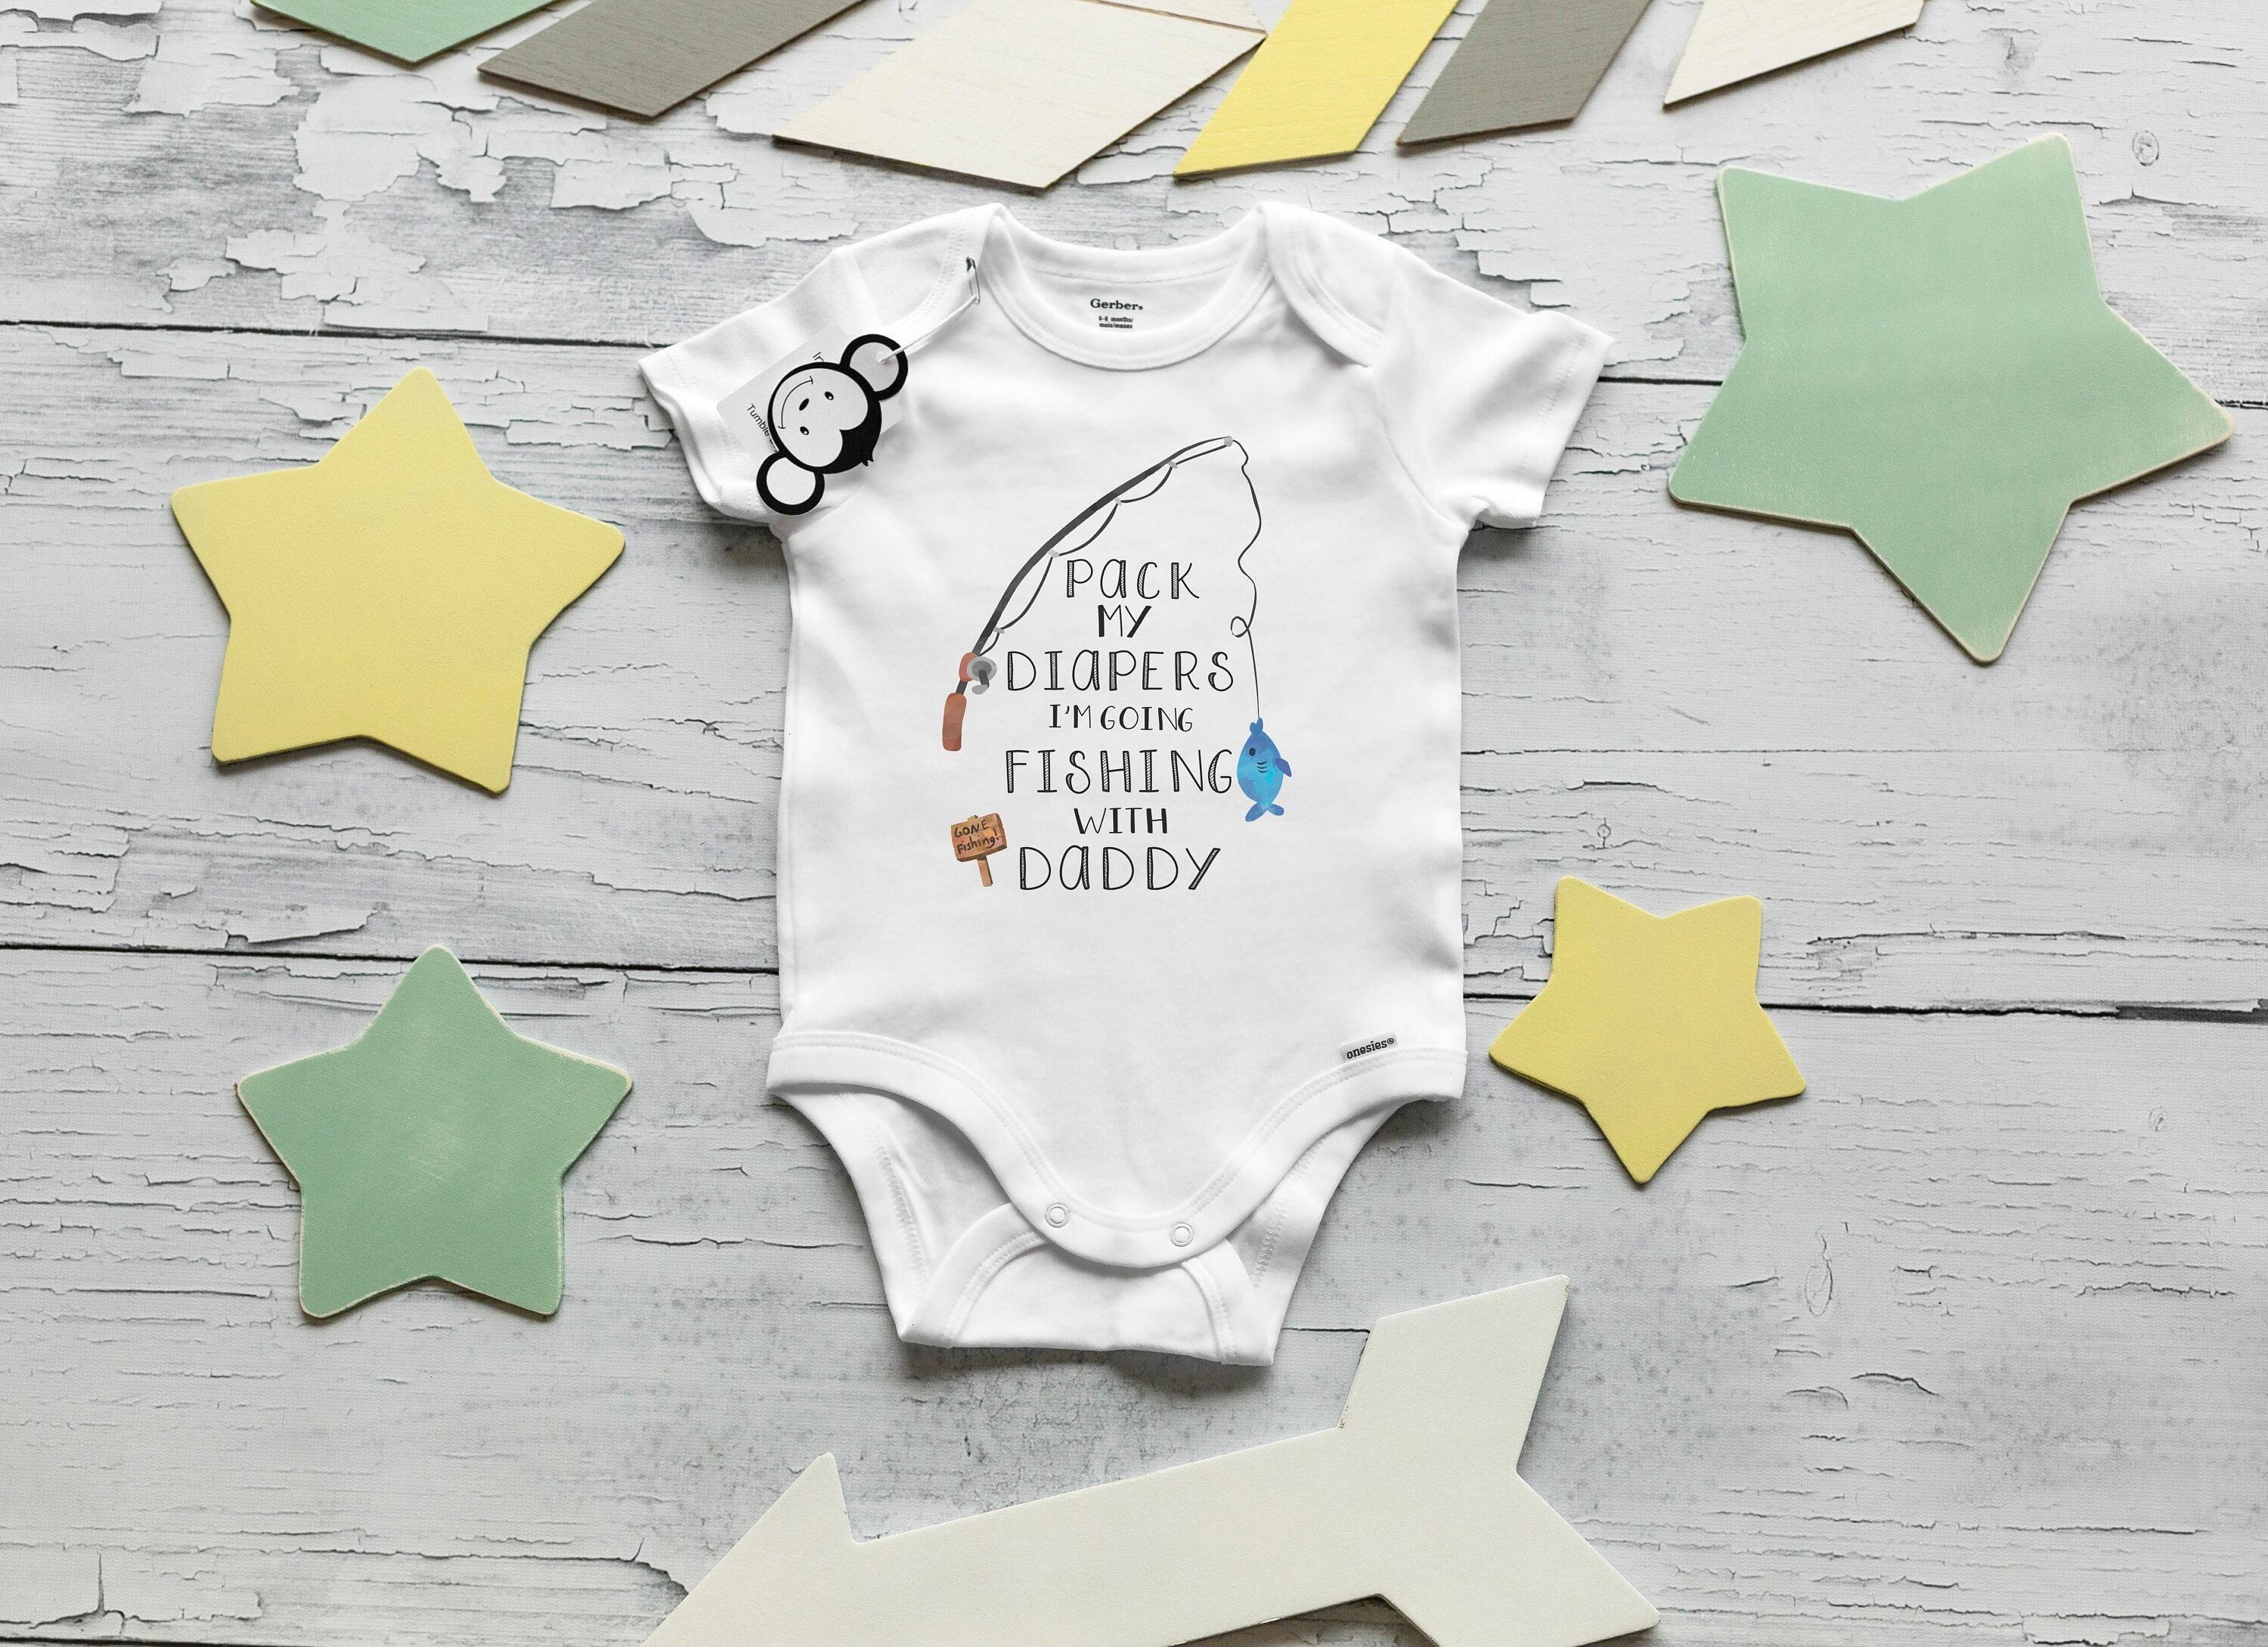 Clothing & Accessories :: Kids & Baby :: Baby Clothing :: Going Fishing  with Daddy Onesie®, Daddy Fishing Onesie® Fishing Baby Clothes, Baby Boy  Clothes, Baby Girl Clothes, Baby Shower Gift